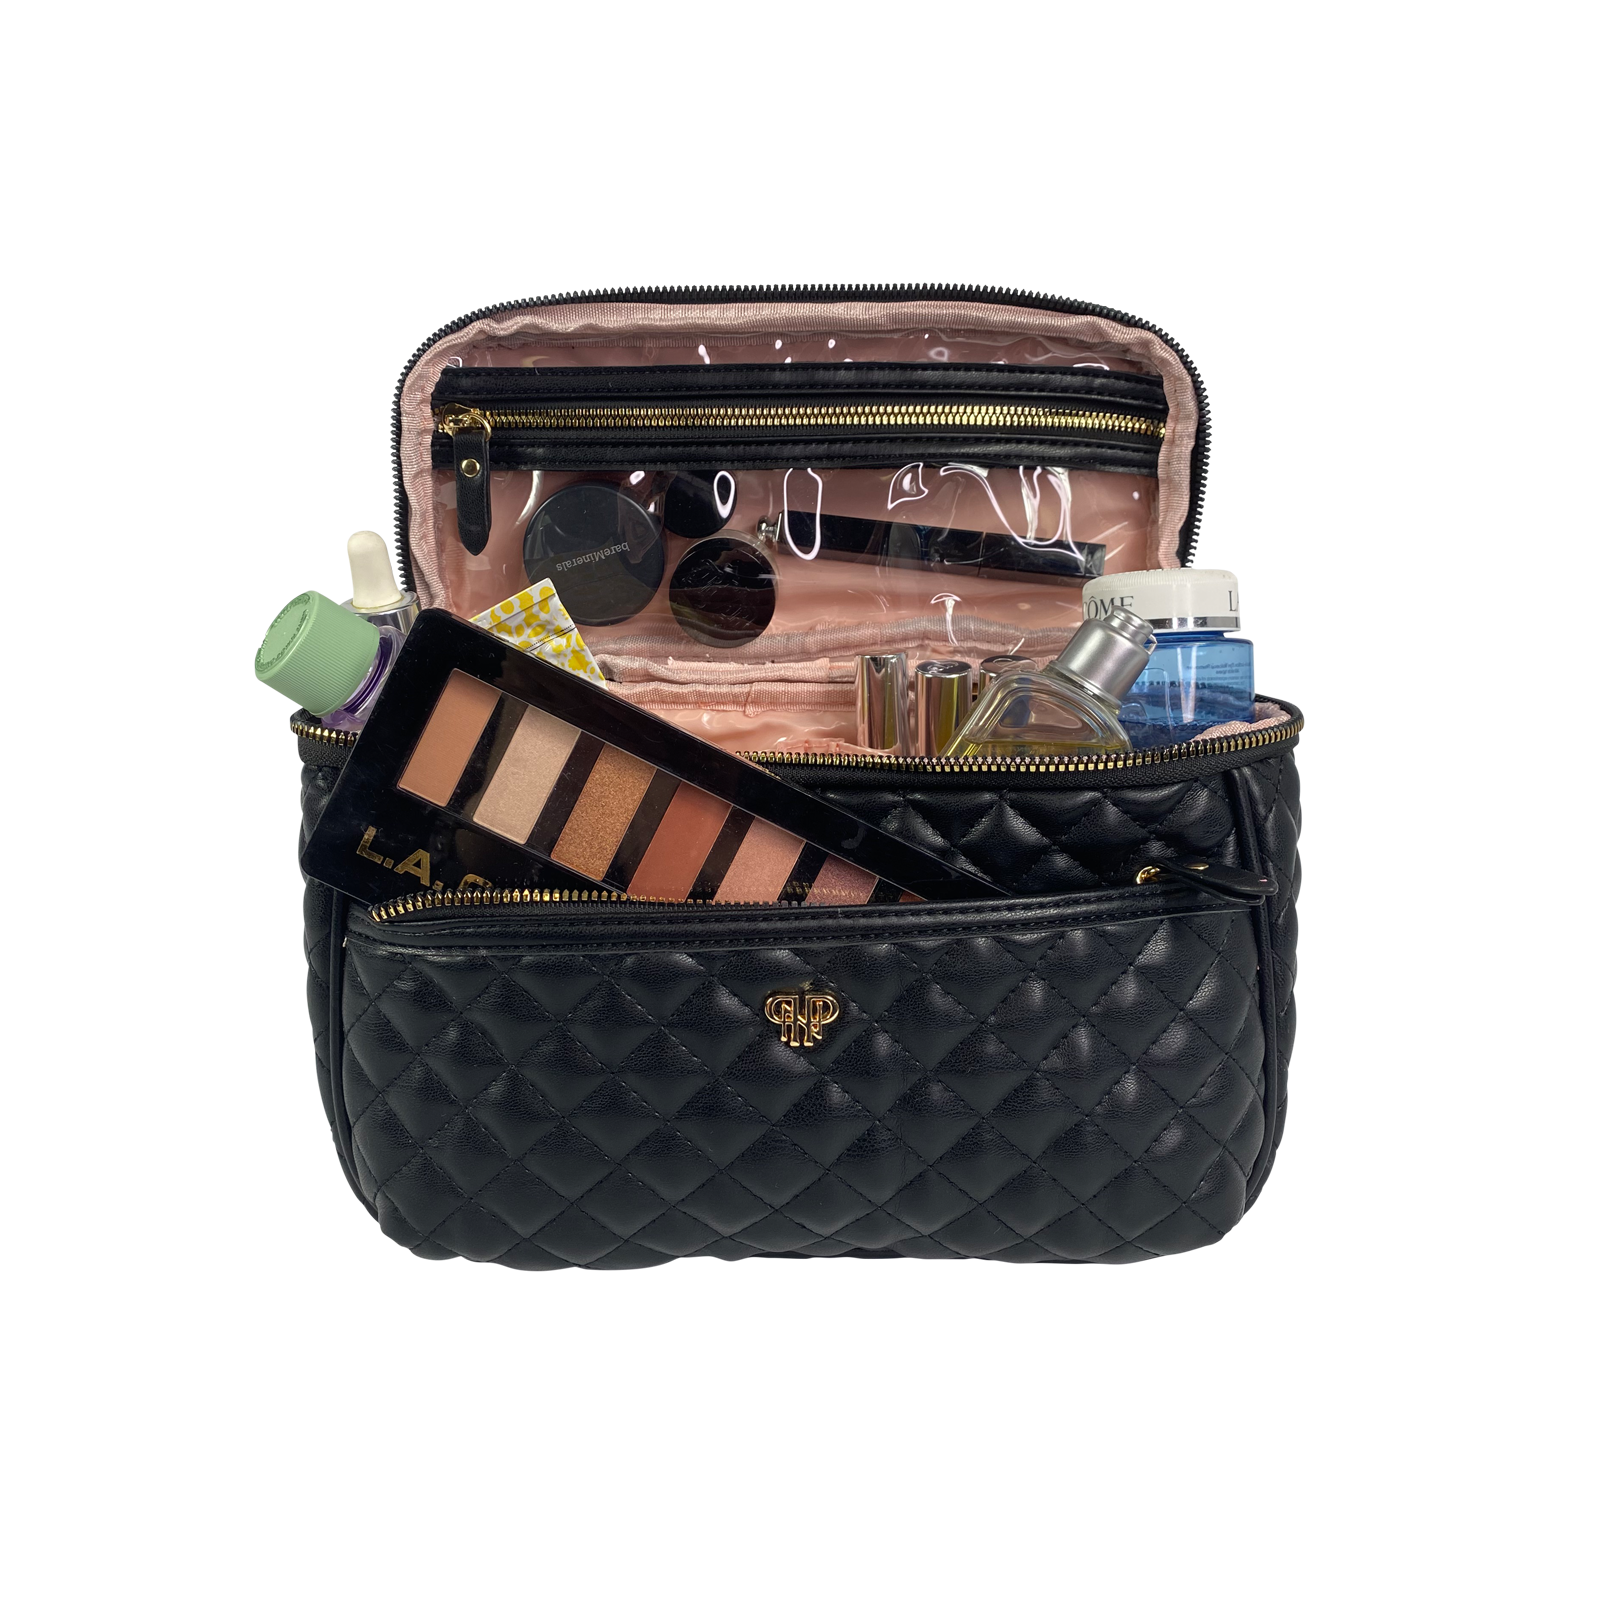 Pursen Classic Train Case - Travel Makeup & Toiletry Case - Navy Quilted